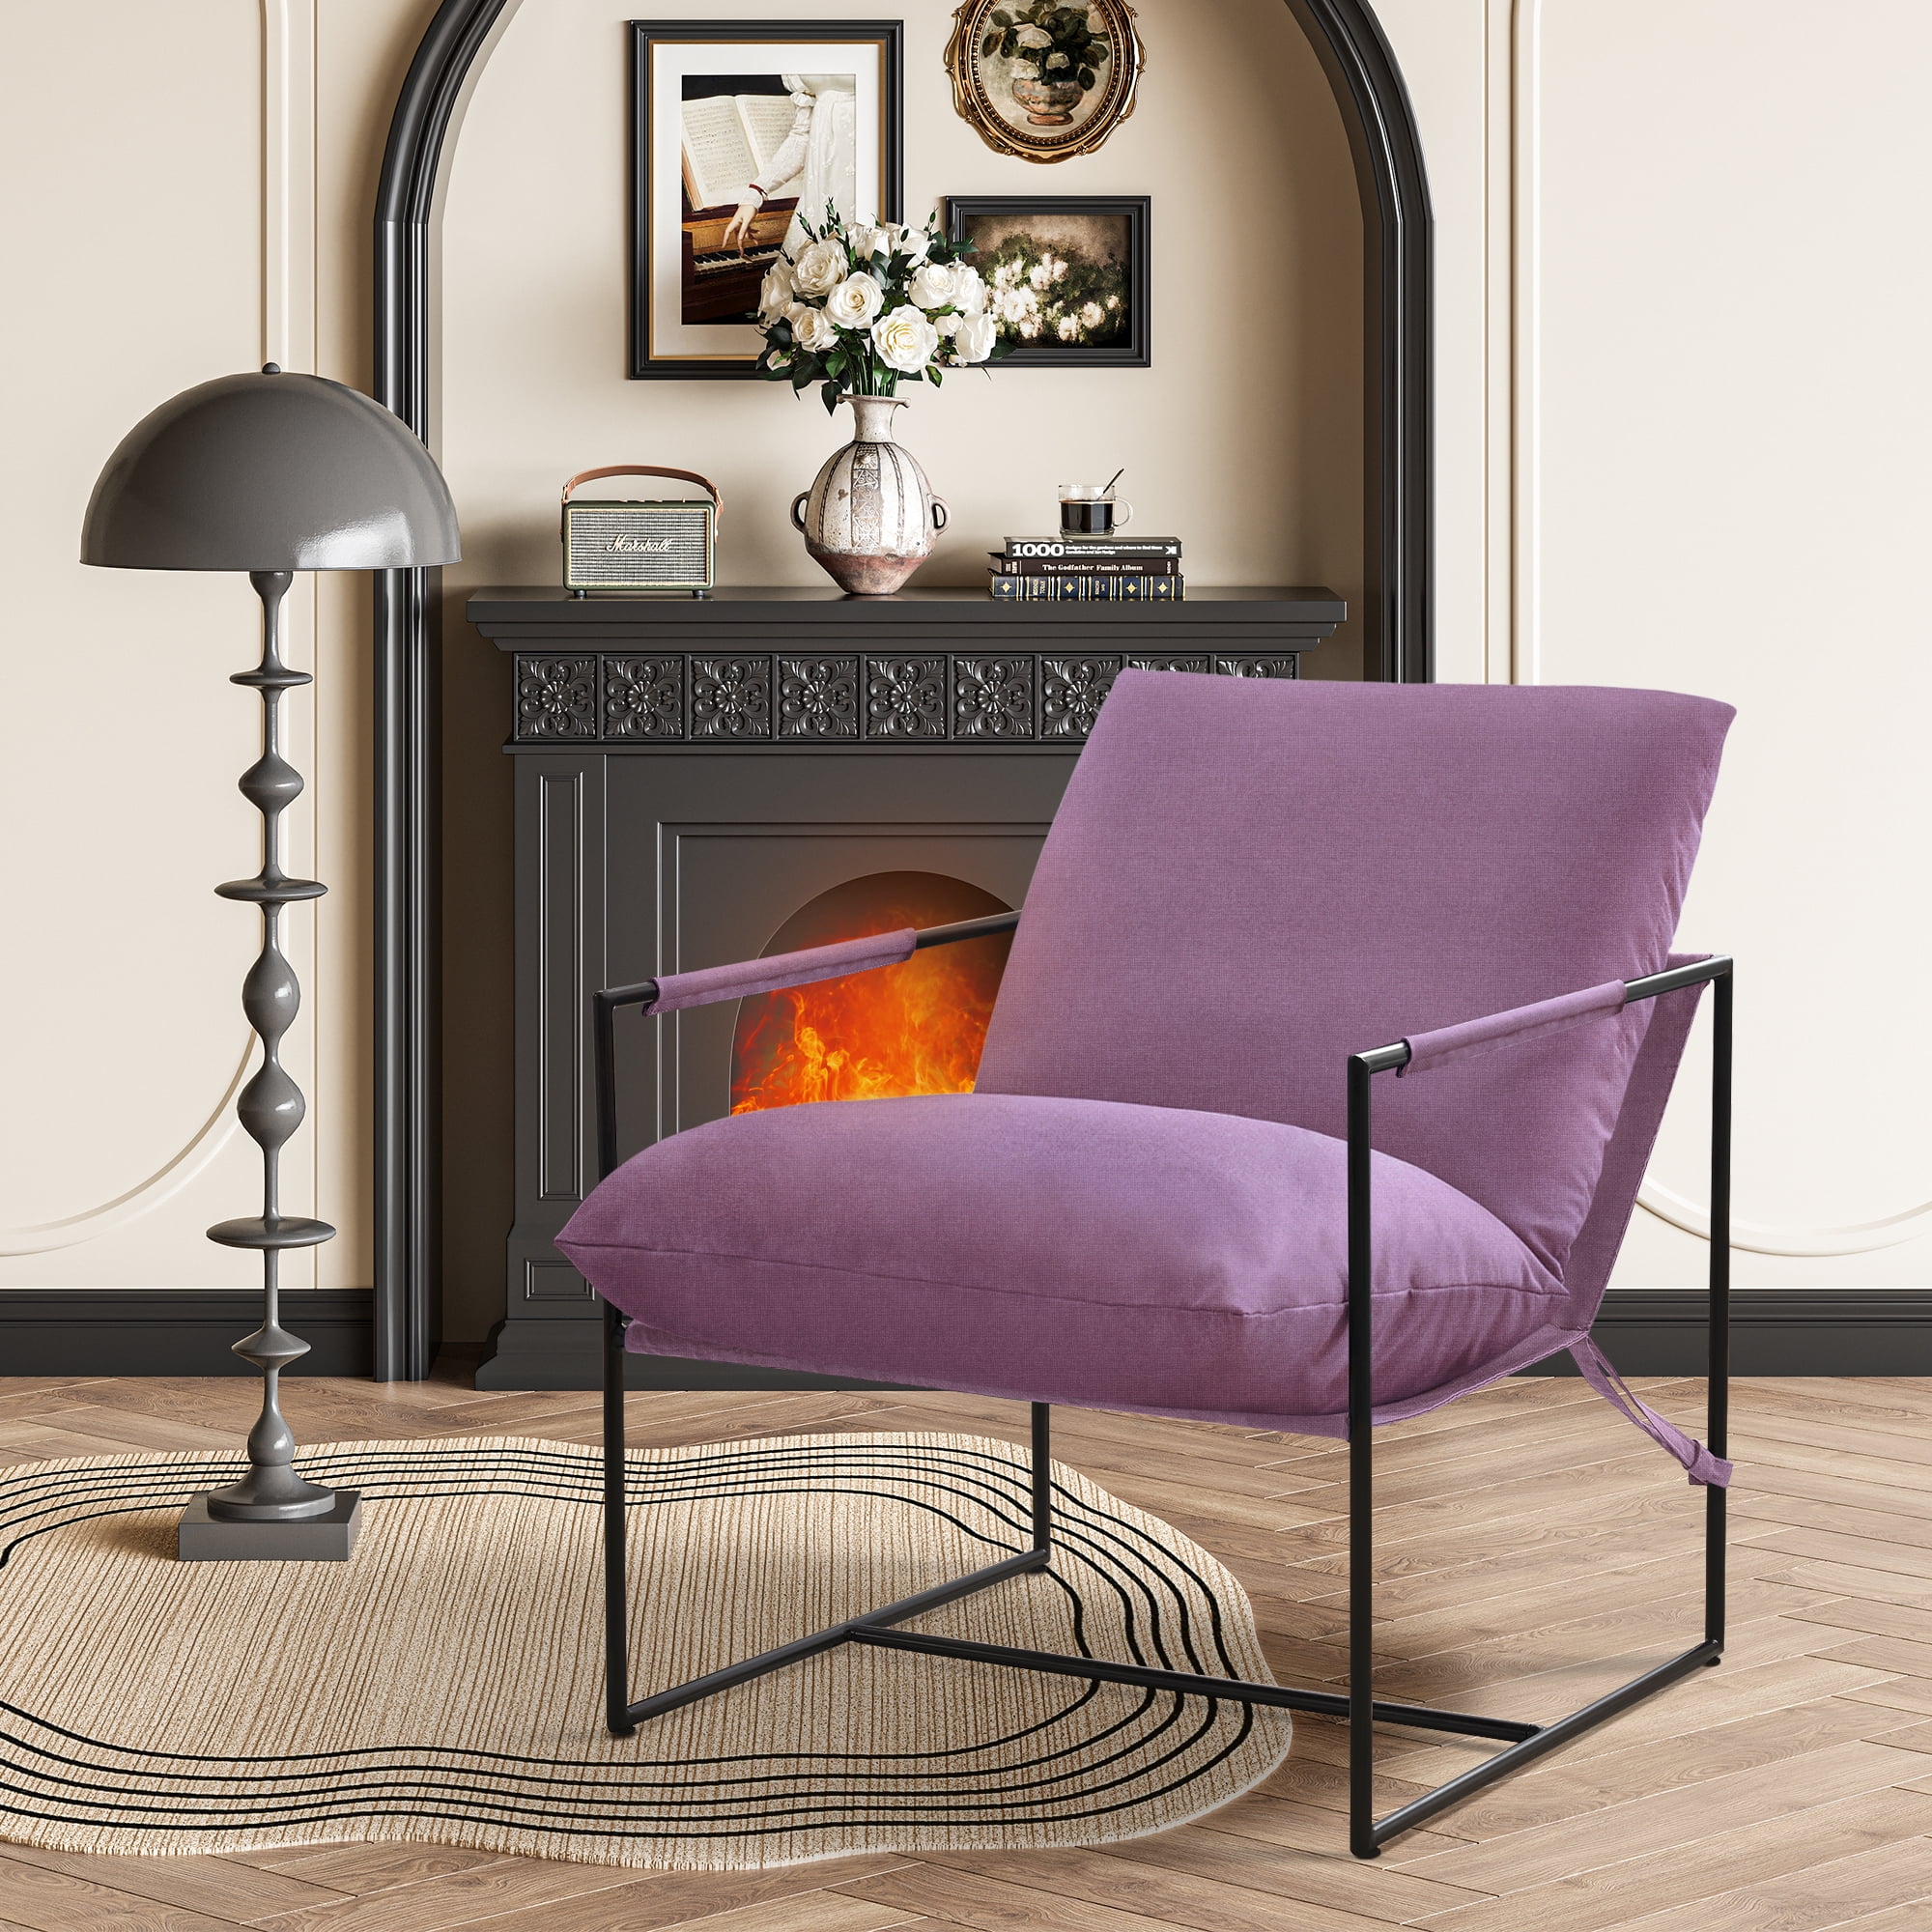 11 Metal-Frame Lounge Chairs We're Loving Right Now